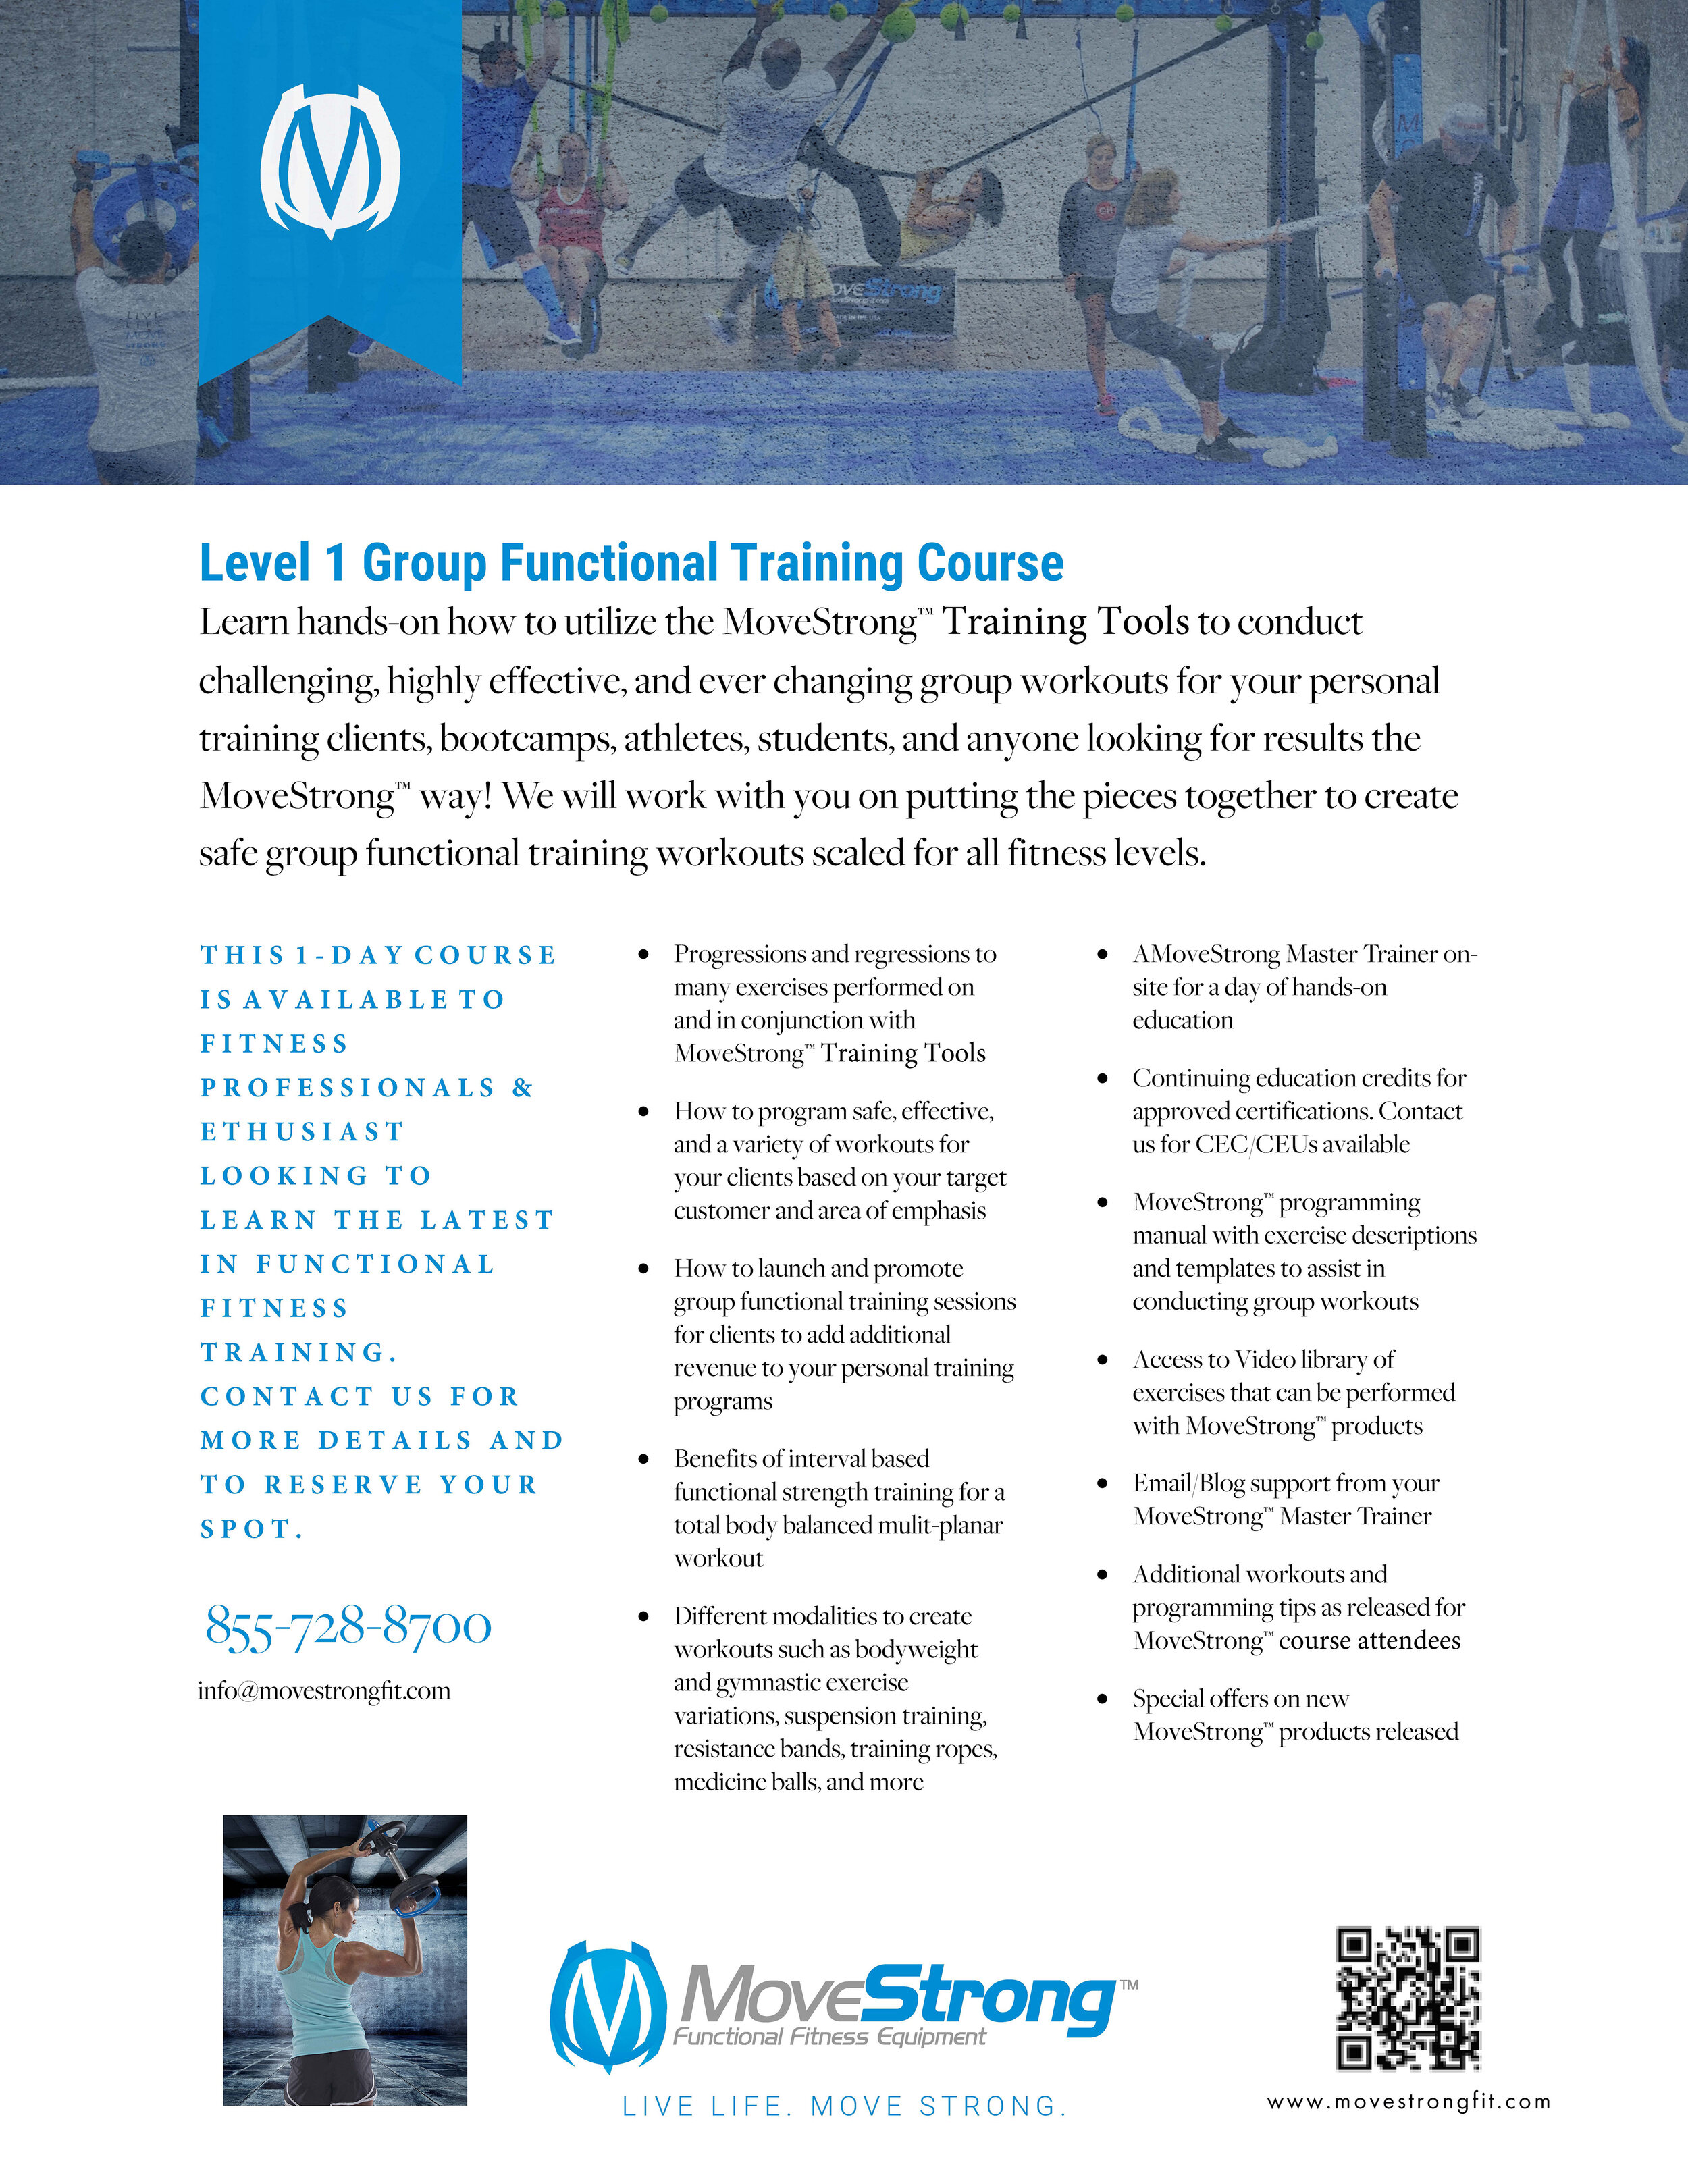 MoveStrong Group Functional Training-Level1Flyer-DEFINING Moment Fitness 5-1-2021-2_Page_2.jpg